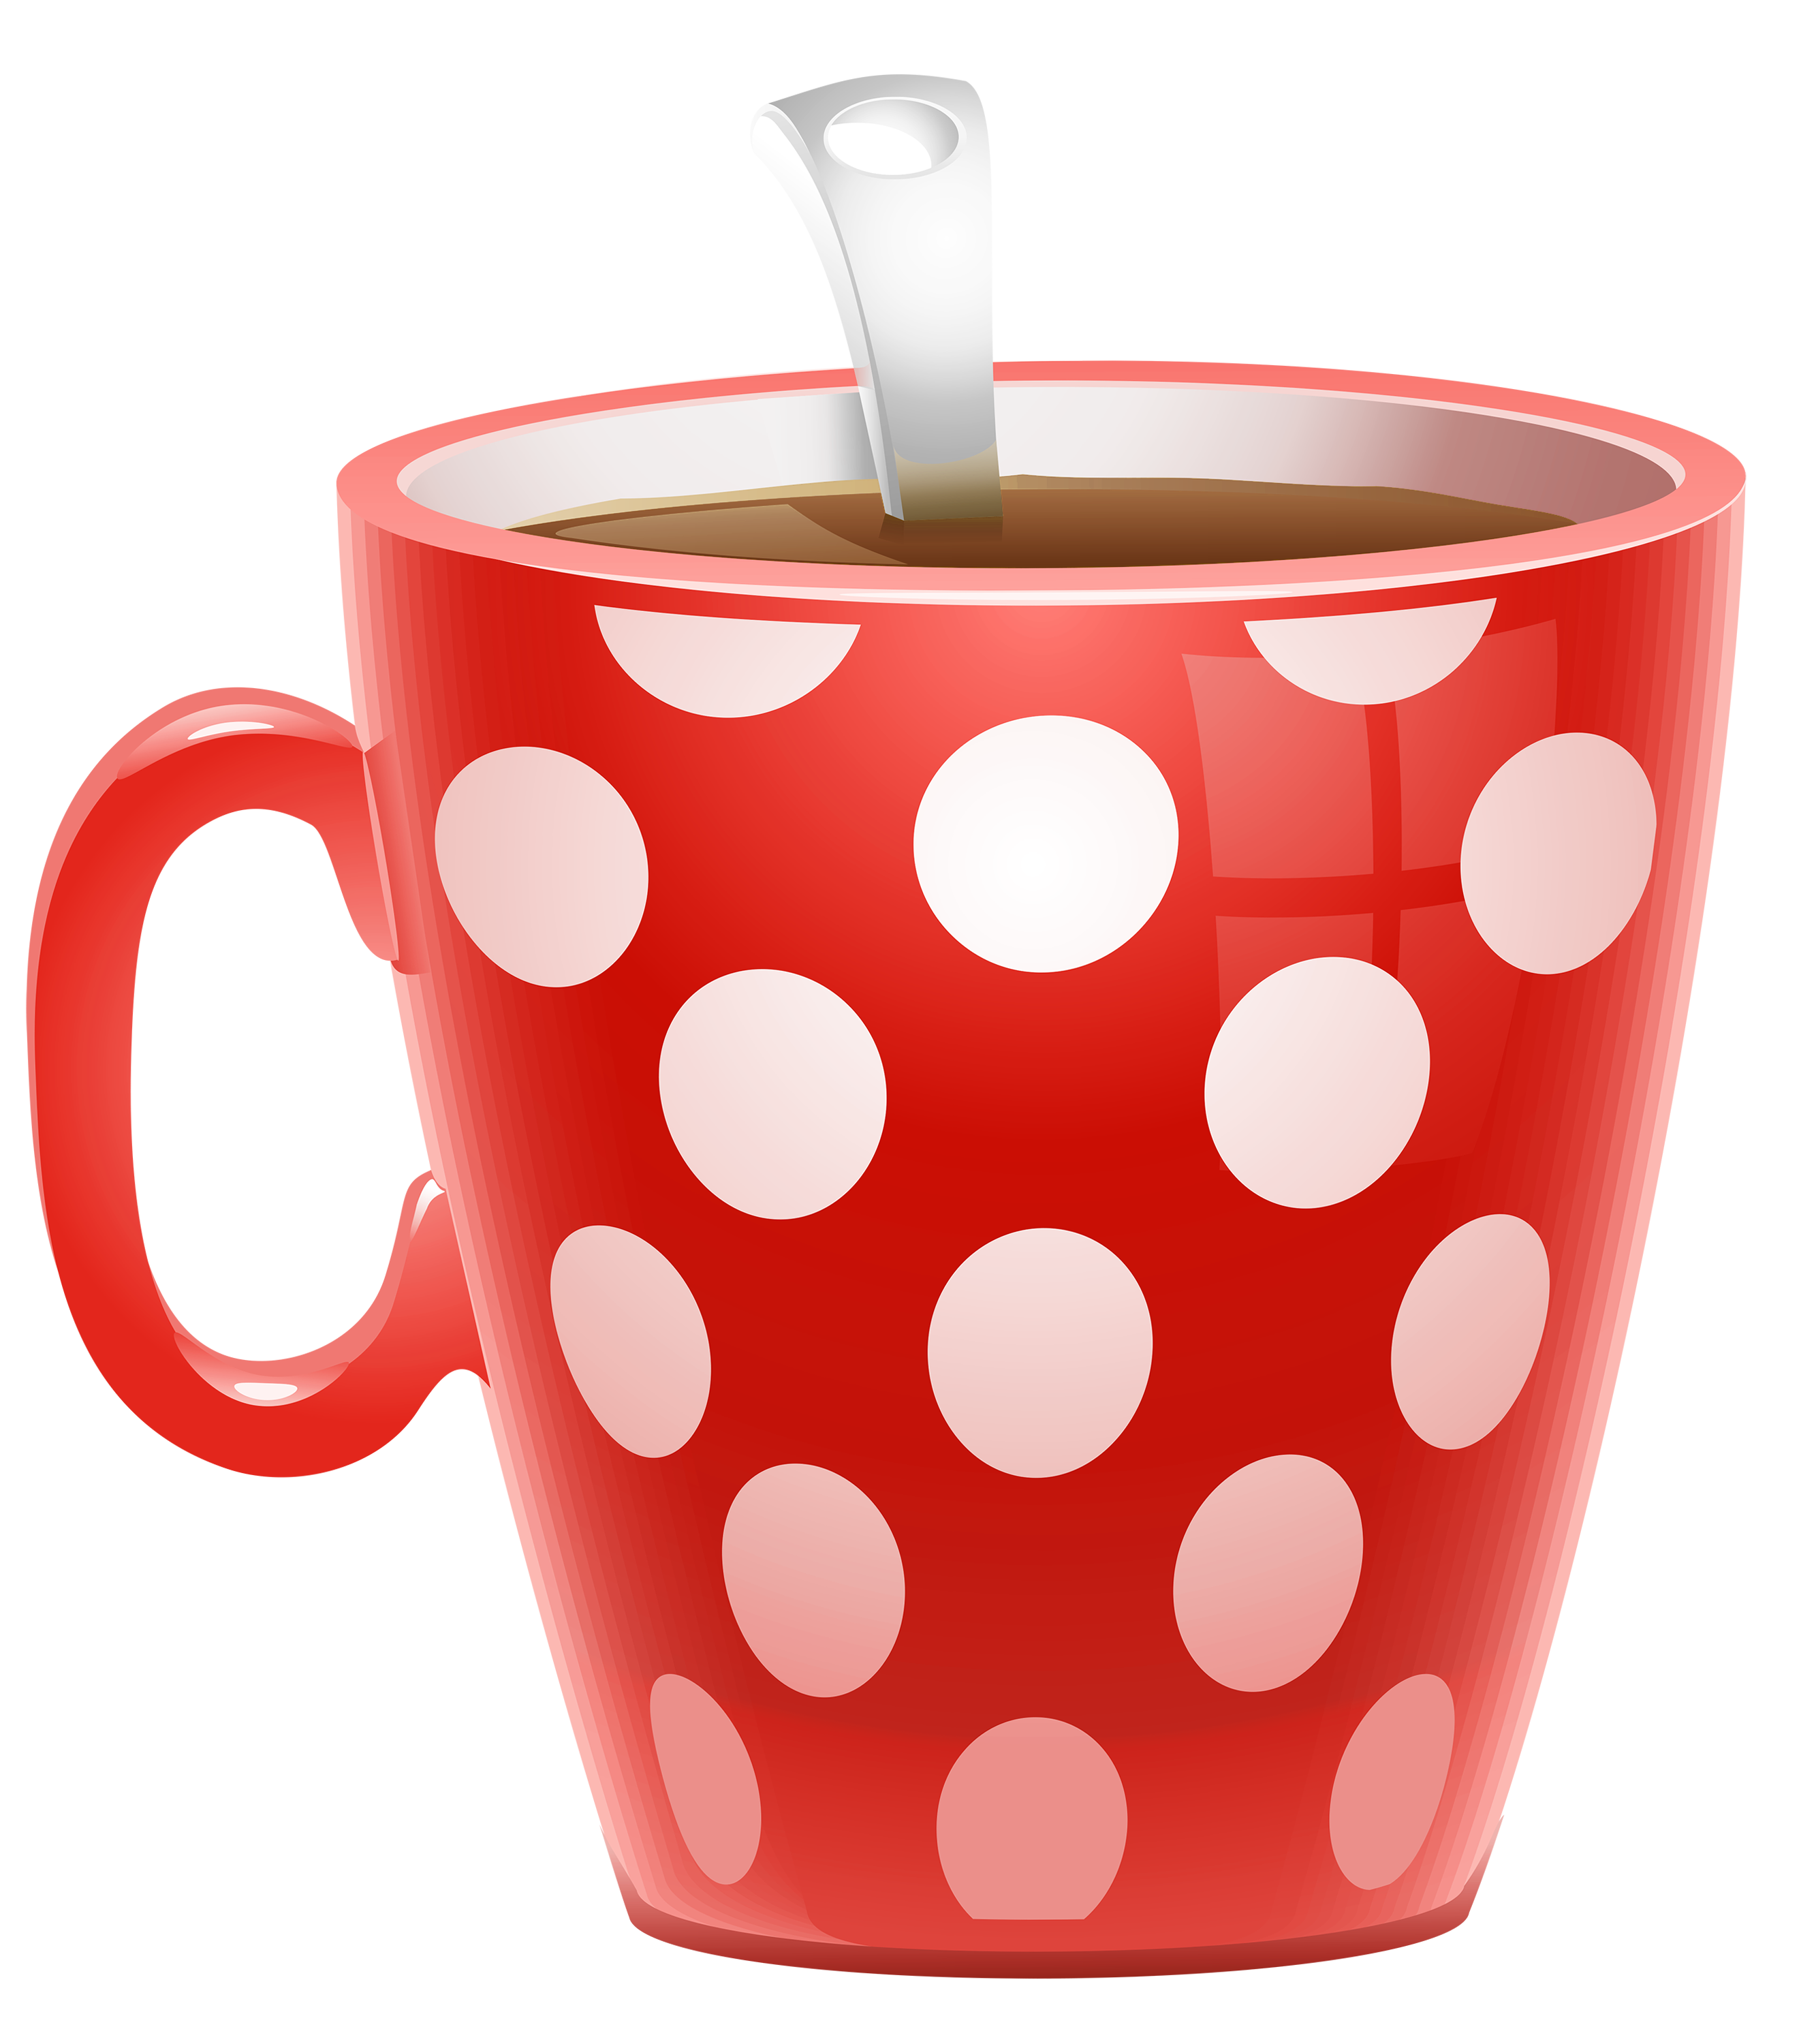 red coffee cup clip art